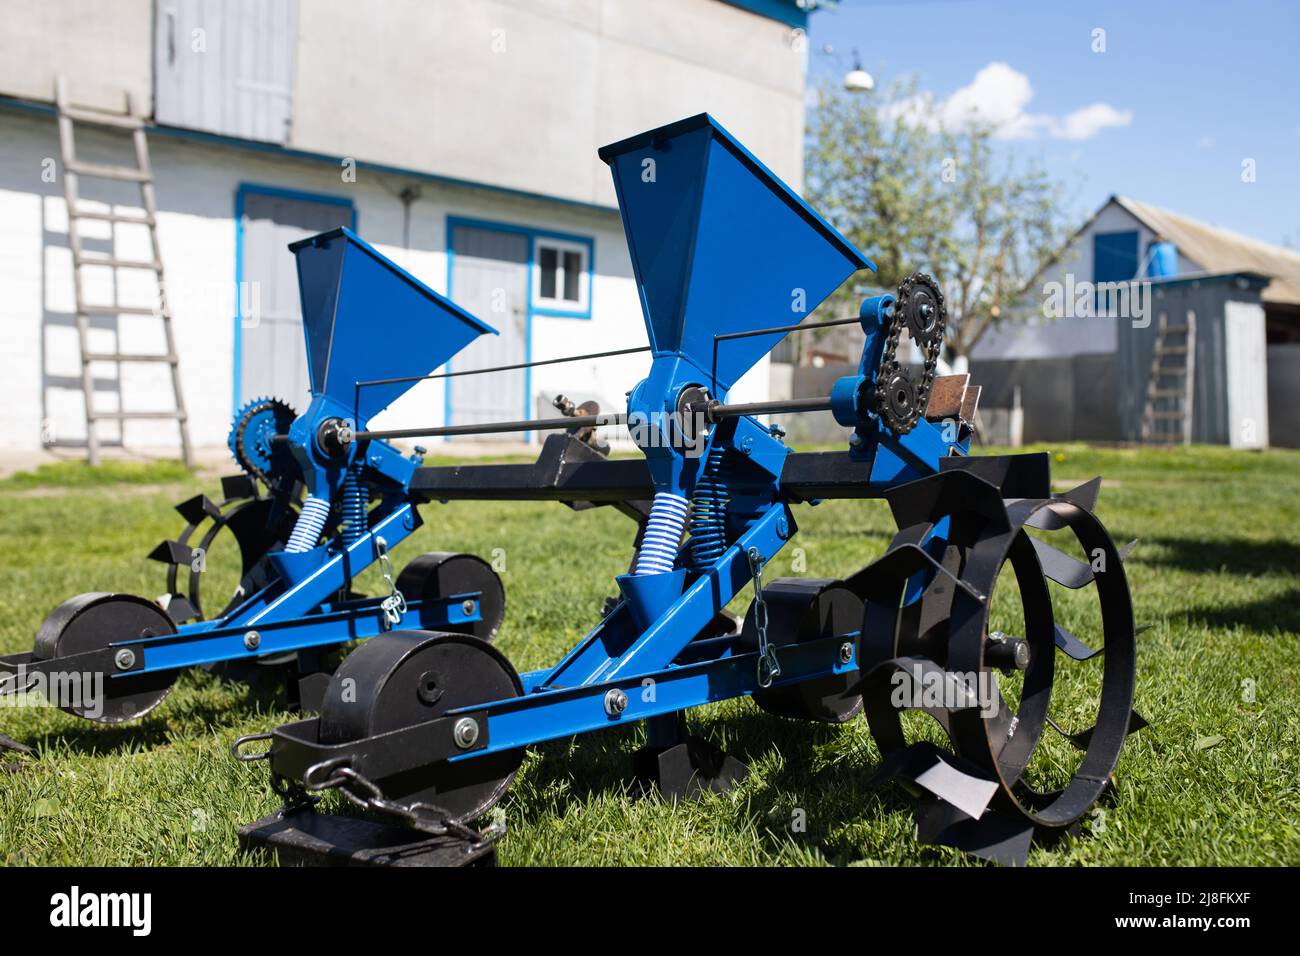 Blue seeder for agricultural machinery on the grass Stock Photo